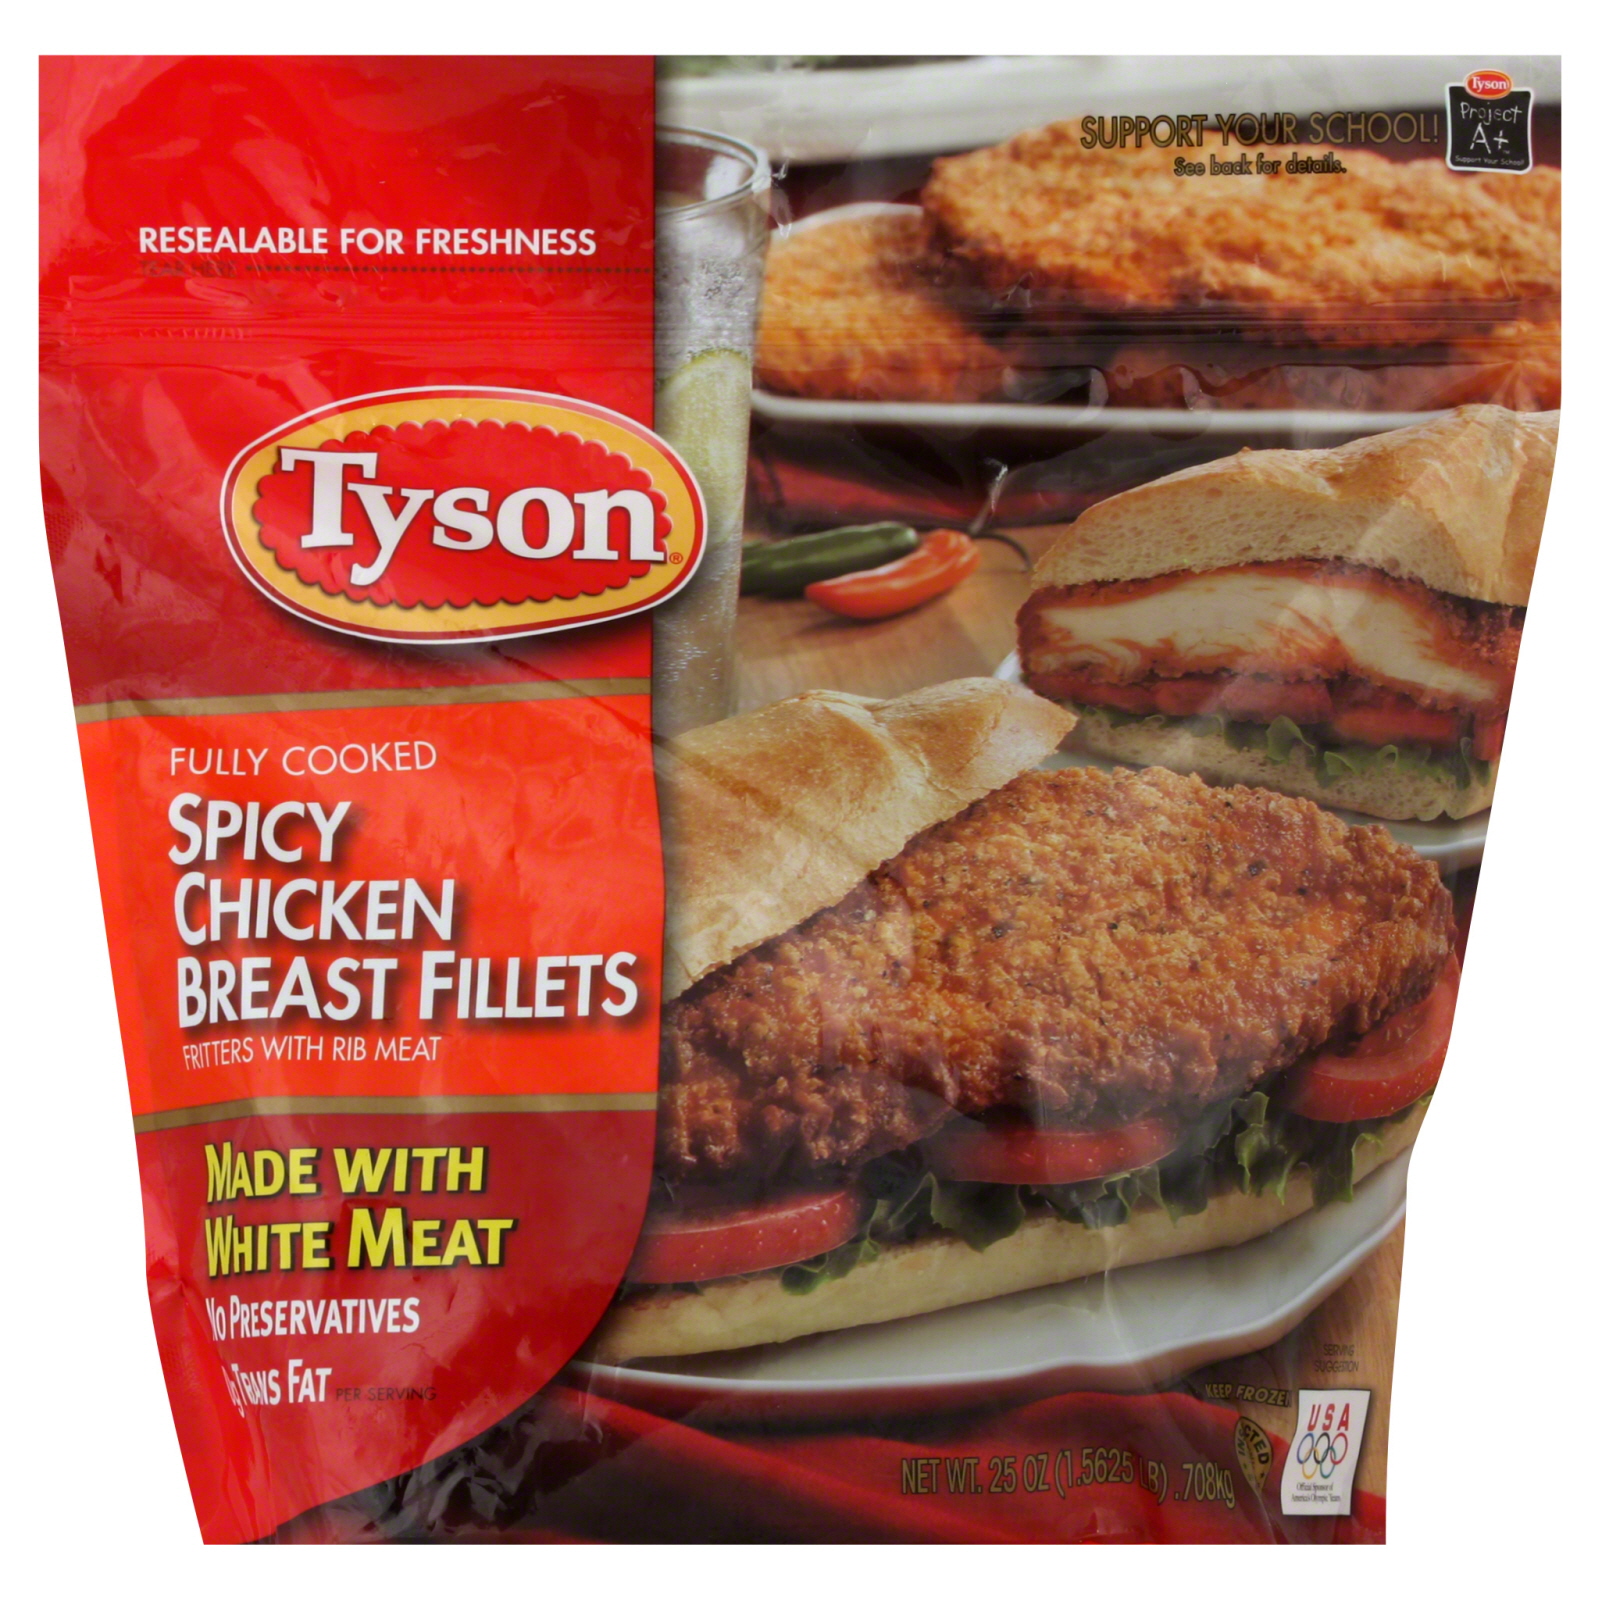 Tyson Any'tizers Chicken Breast Fillets, Spicy, 25 oz (1.5625 lb) 708 kg